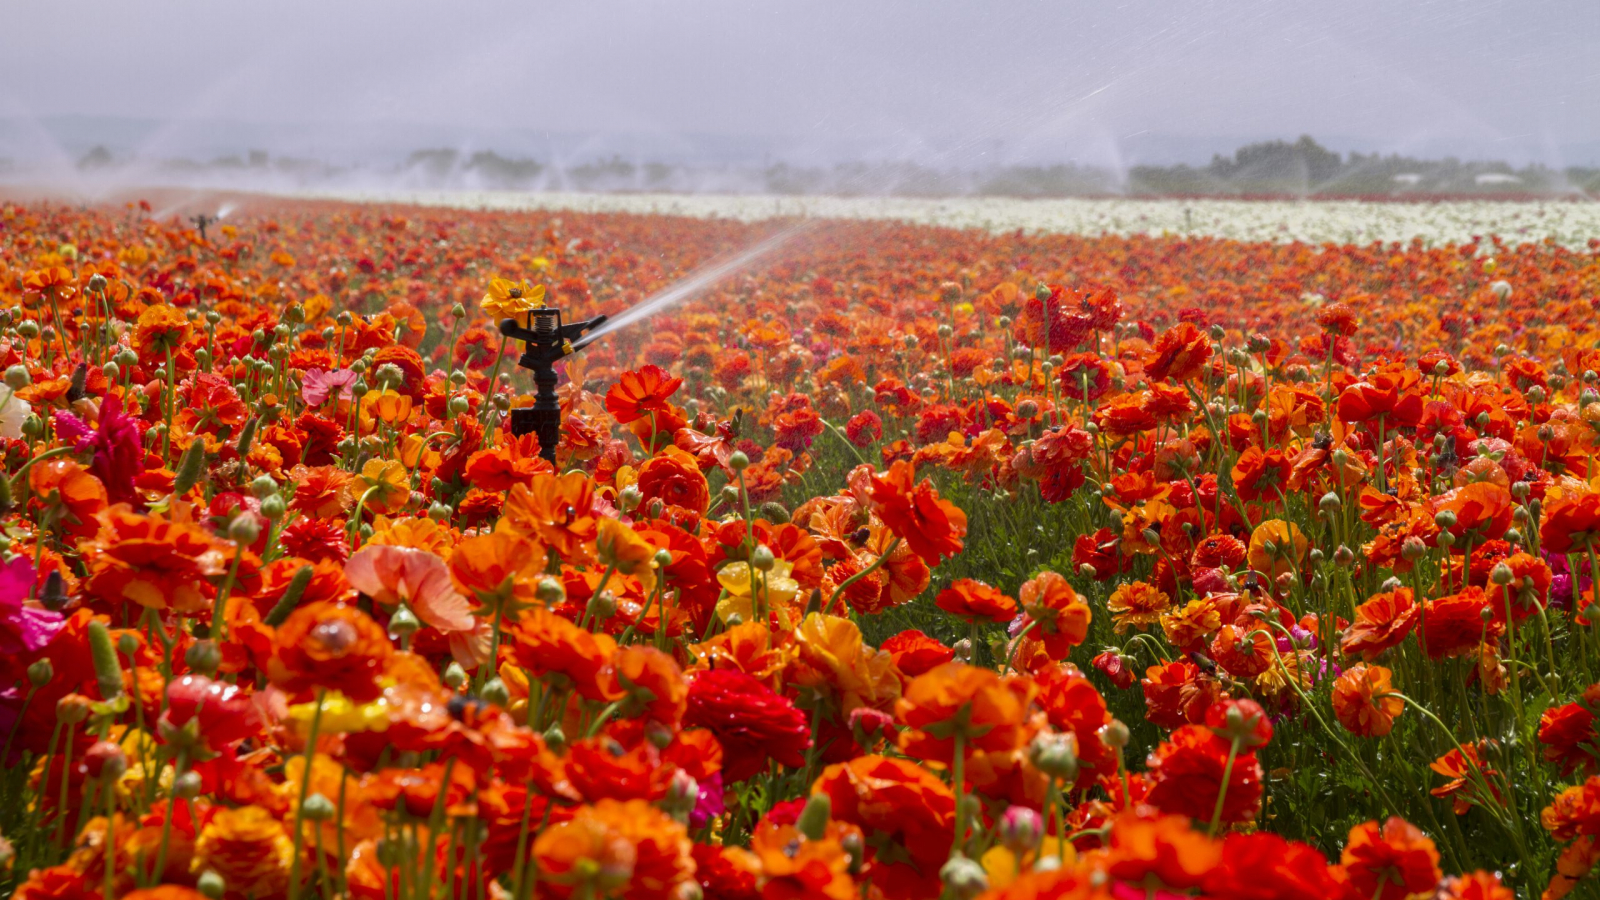 Field of blossoming buttercup flowers creates carpet of colors, with working sprinkler splashing drops of water over the field, as part of an irrigation system